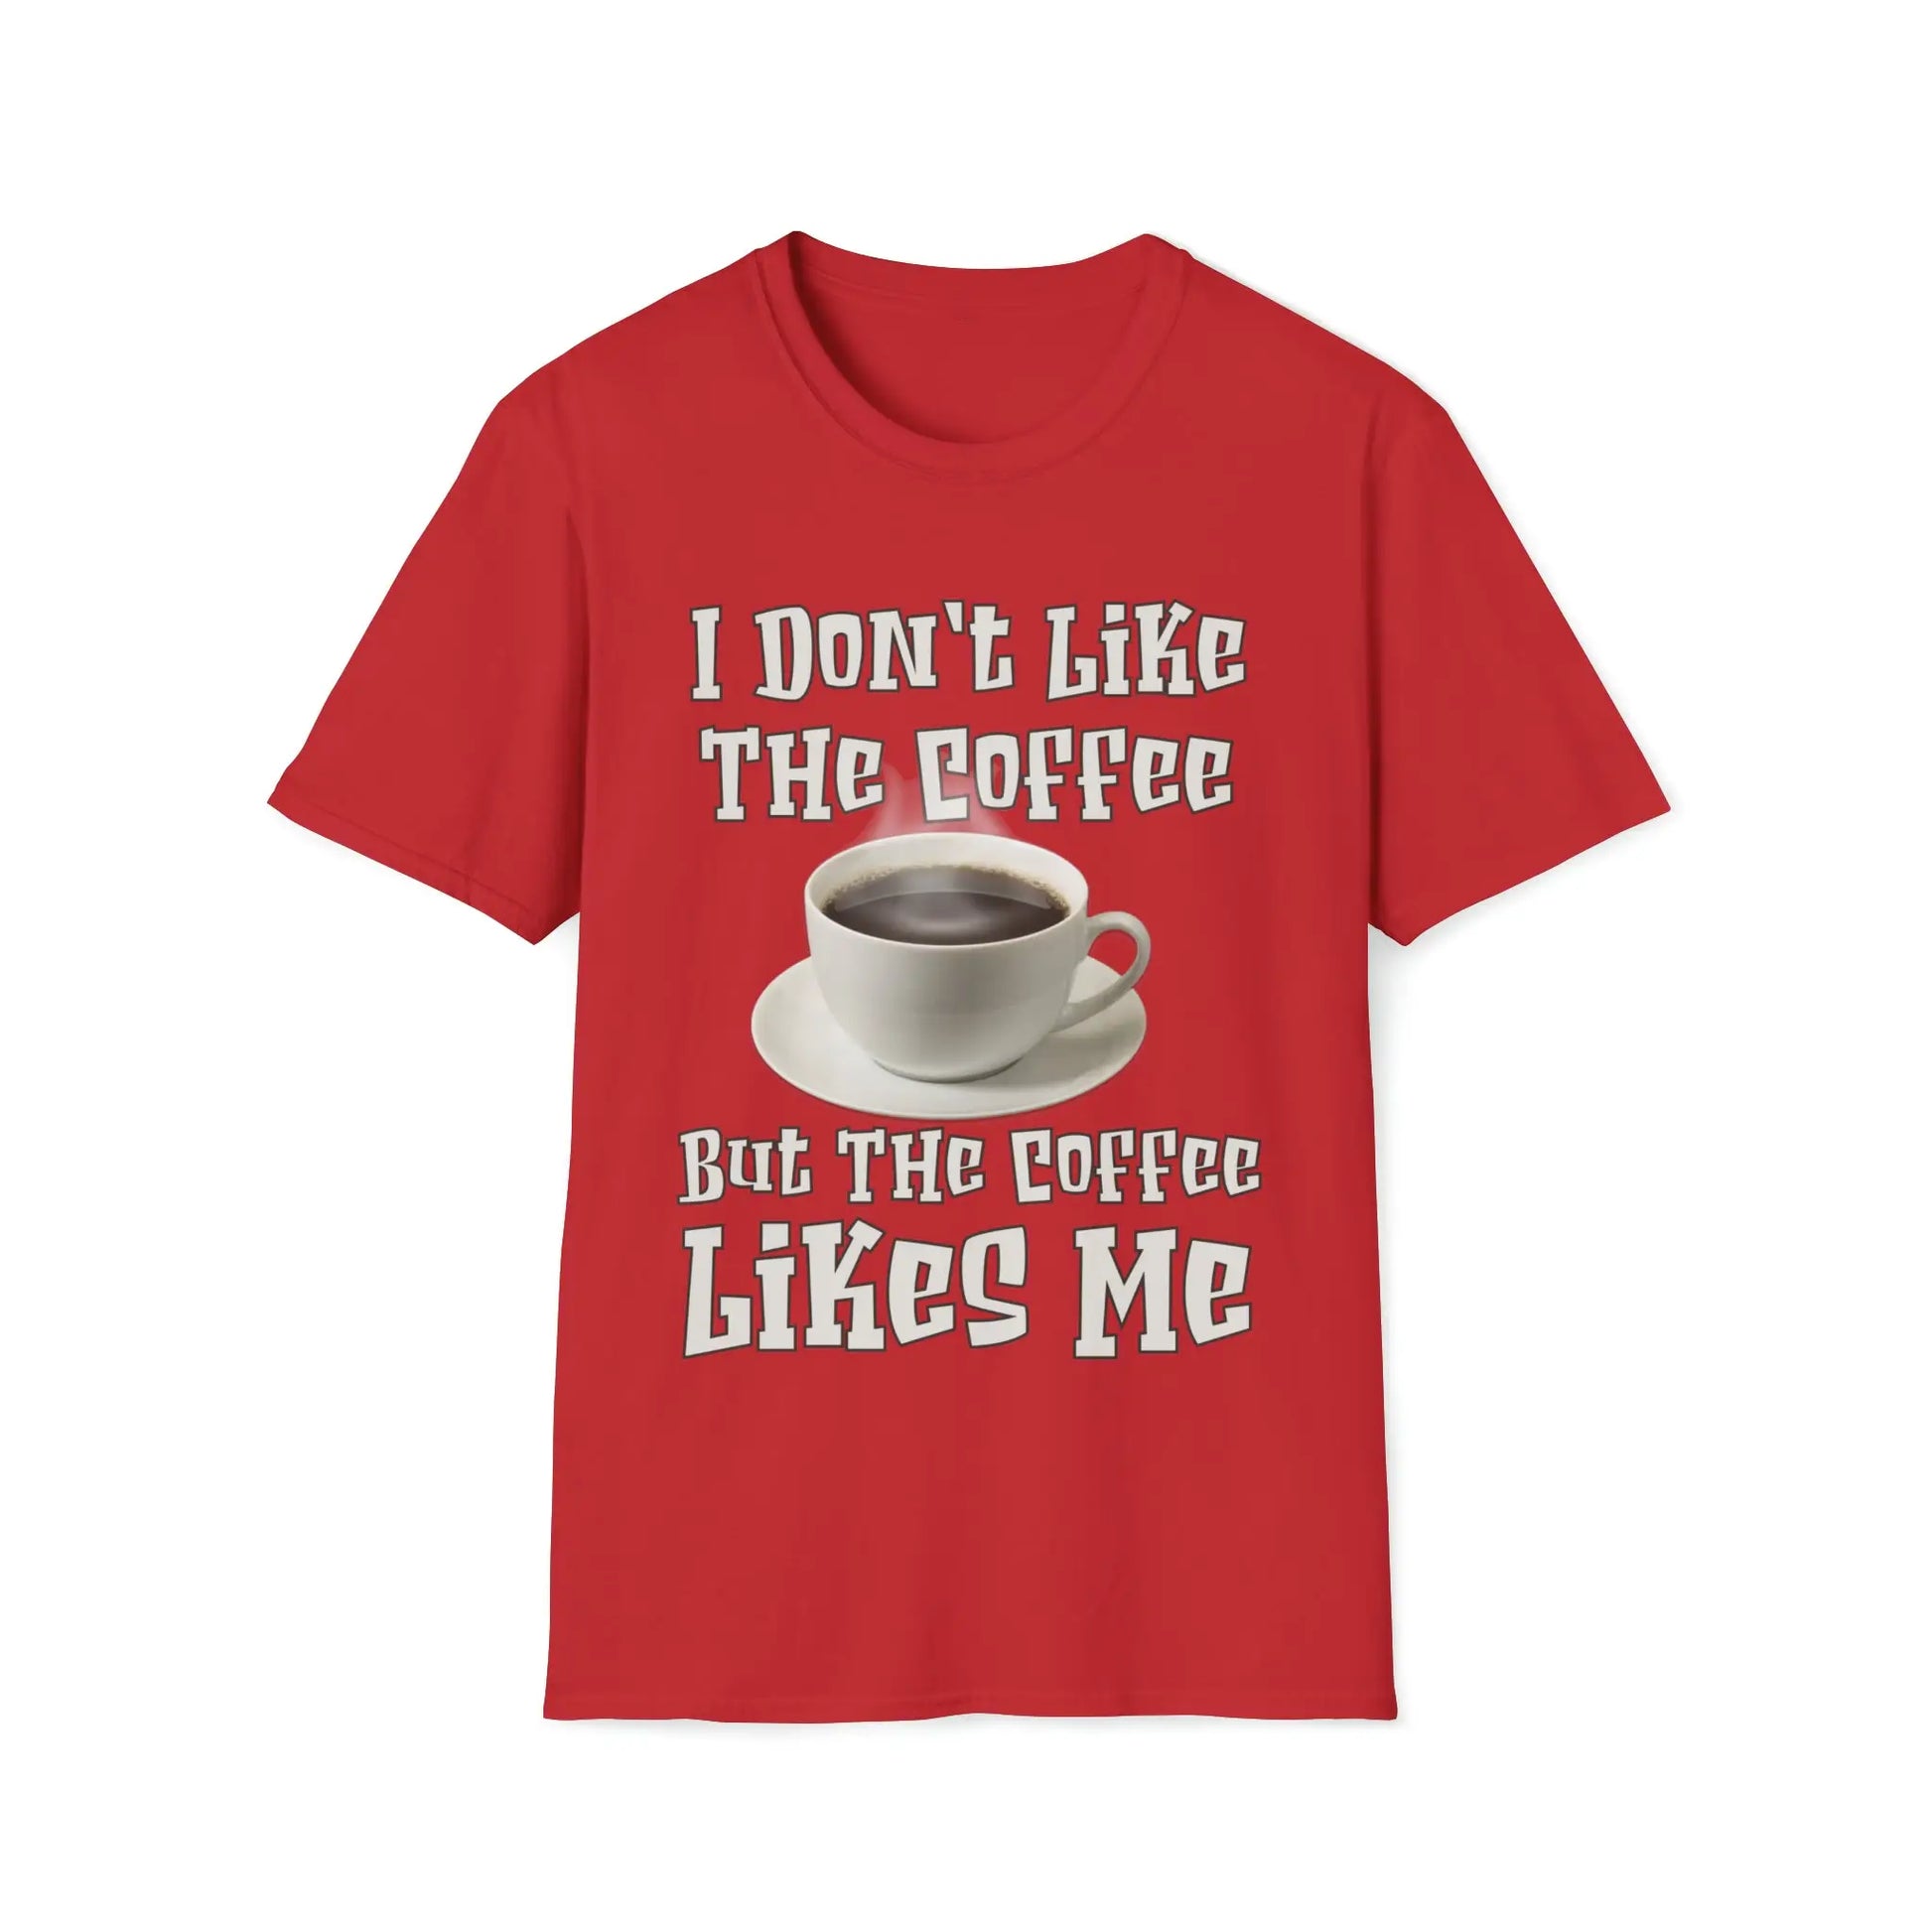 I Don't Like The Coffee Women's T-Shirt - Wicked Tees